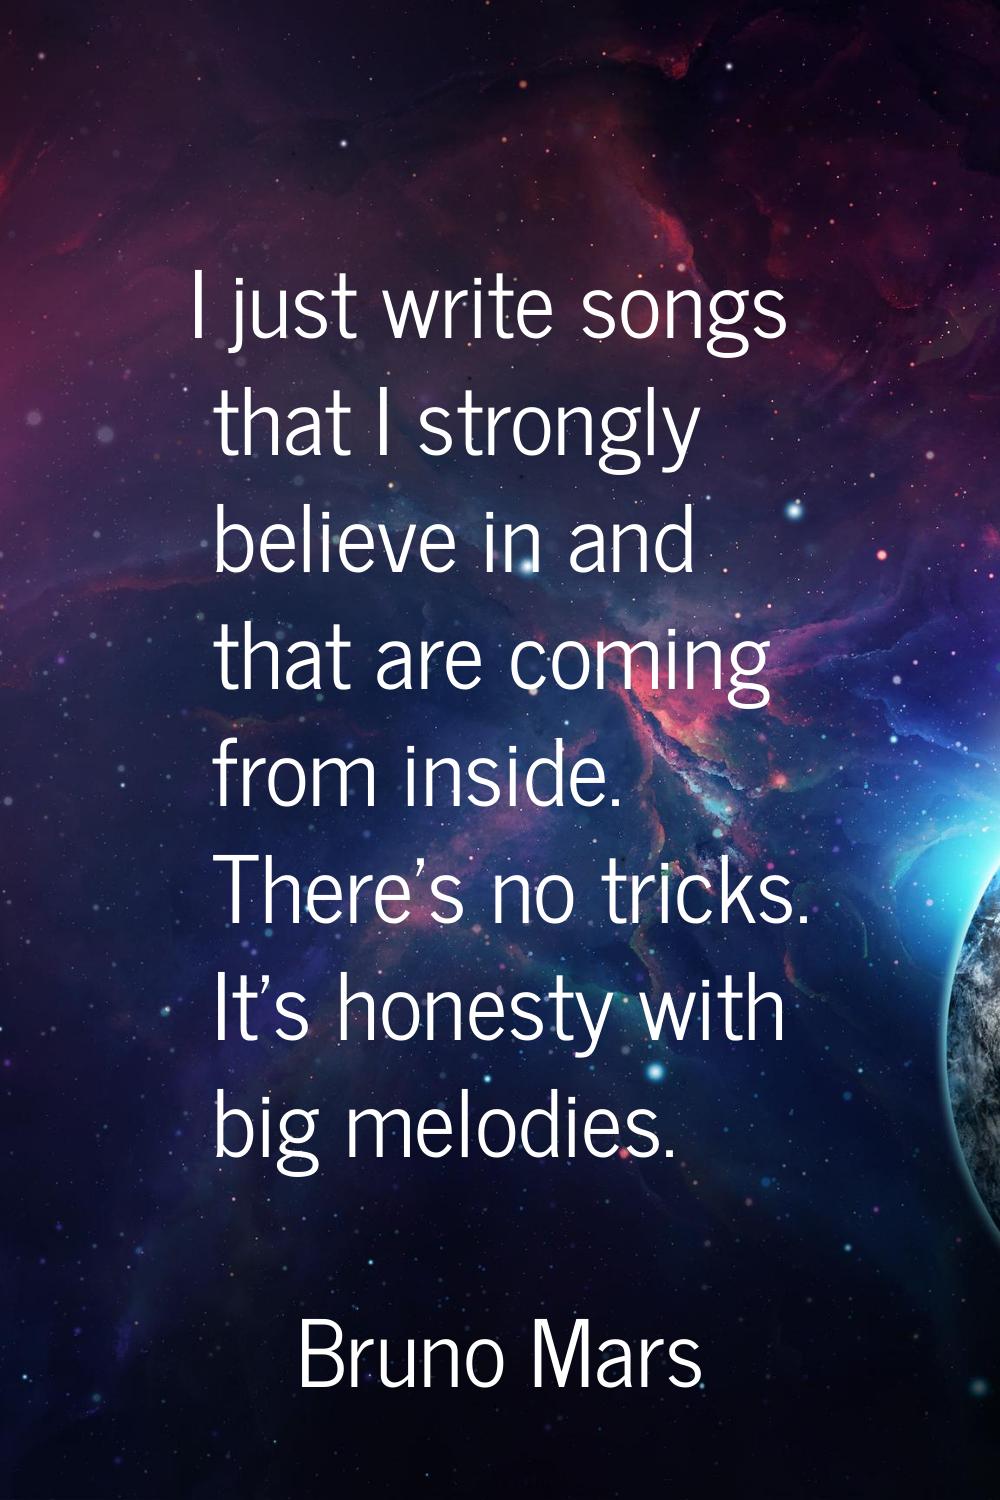 I just write songs that I strongly believe in and that are coming from inside. There's no tricks. I